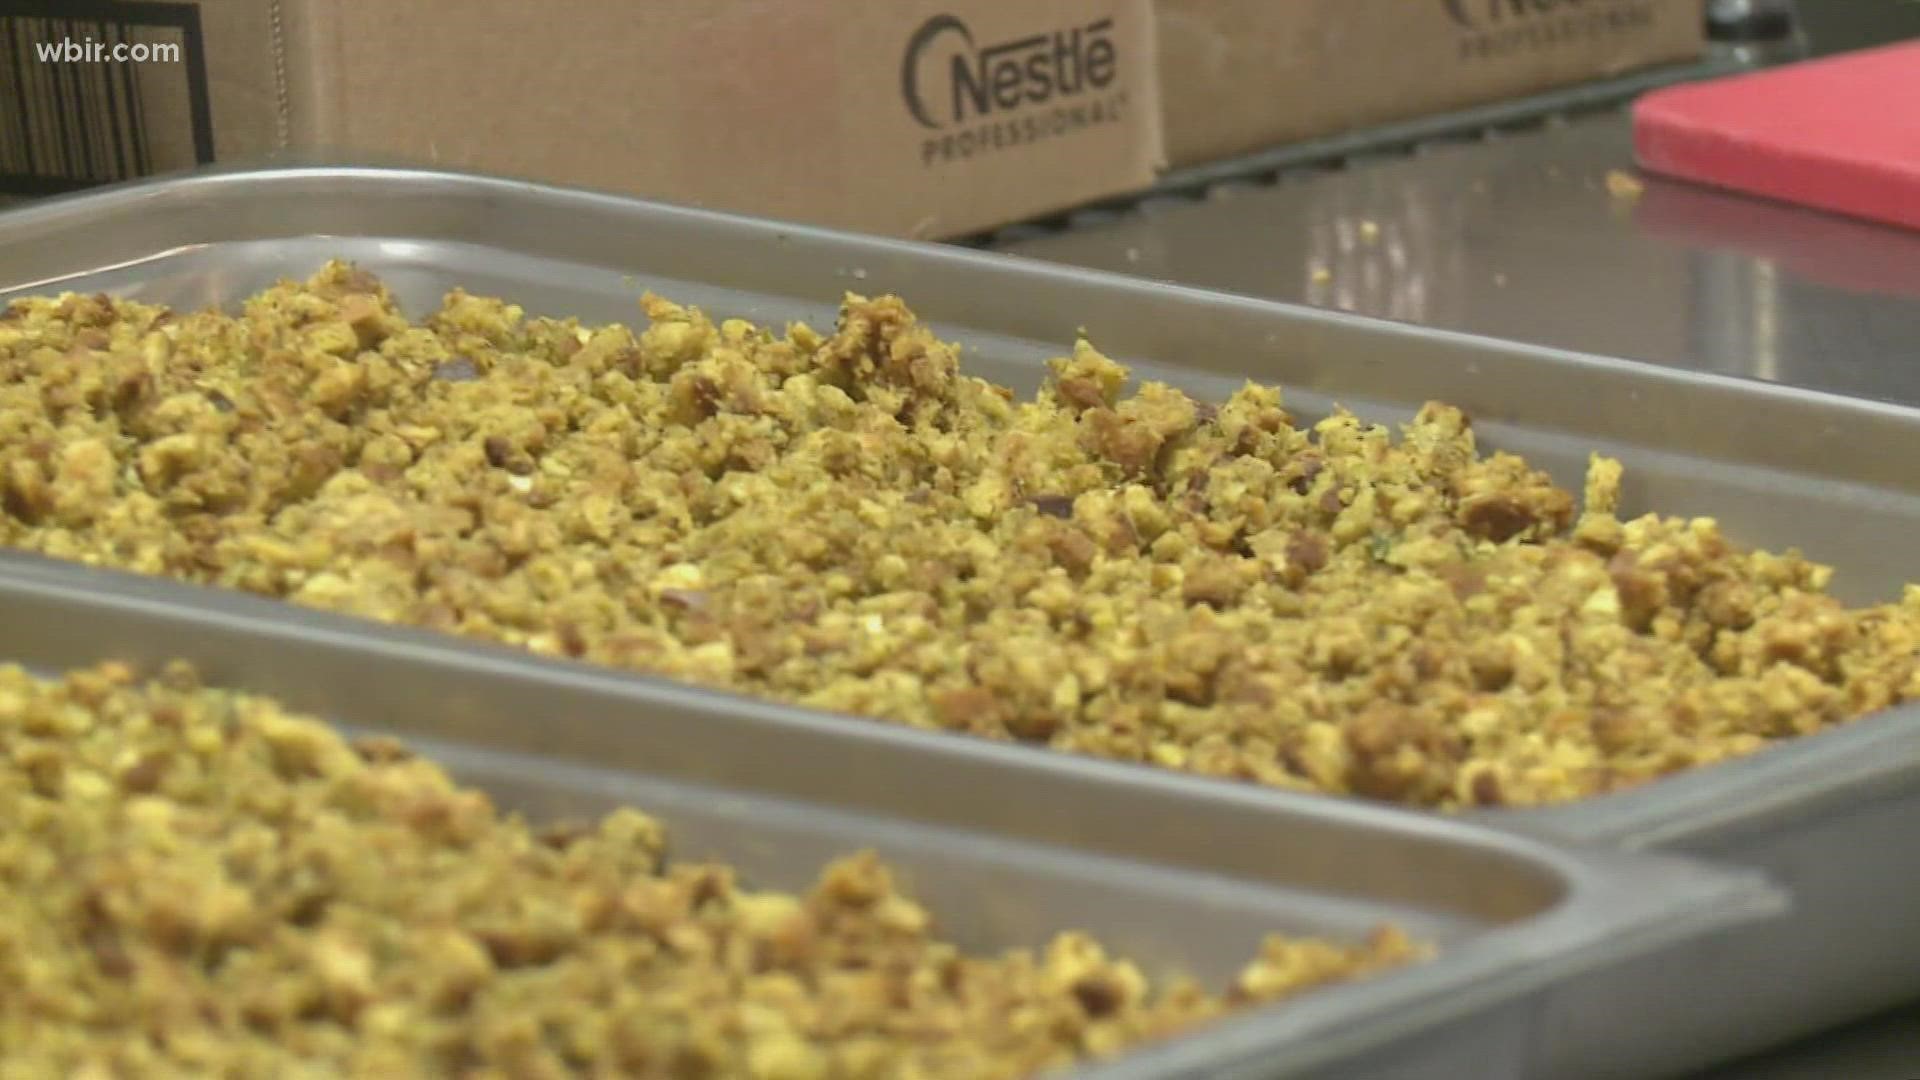 Nonprofits across East Tennessee are preparing to feed hundreds and thousands of people on Thanksgiving. It's not as easy as in previous years.